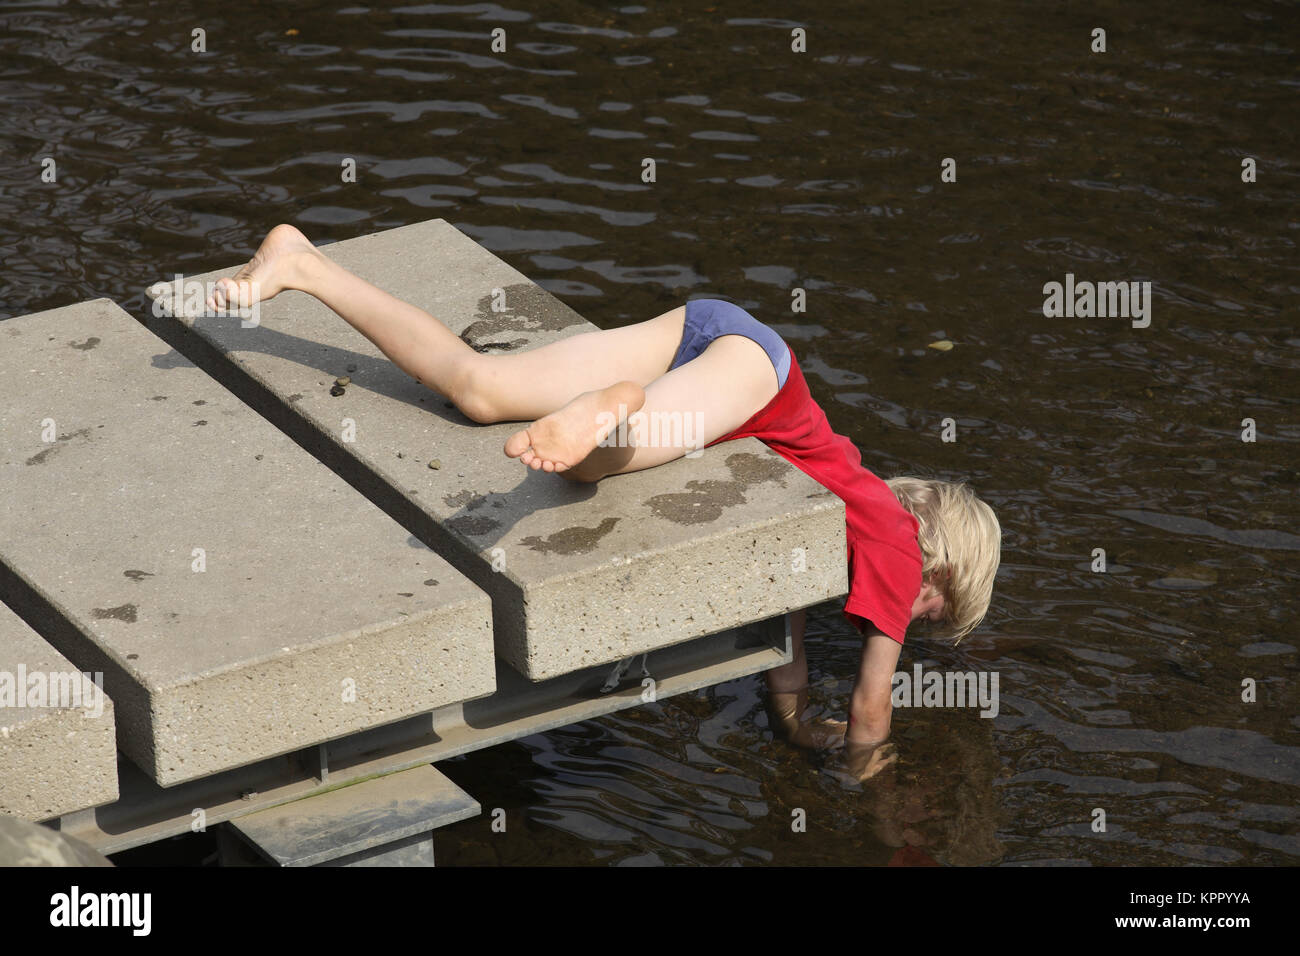 Germnay, Bergisches Land region, Muengsten, boy lying on a landing stage at the river Wupper.  Deutschland, Bergisches Land, Muengsten, Junge spielt a Stock Photo